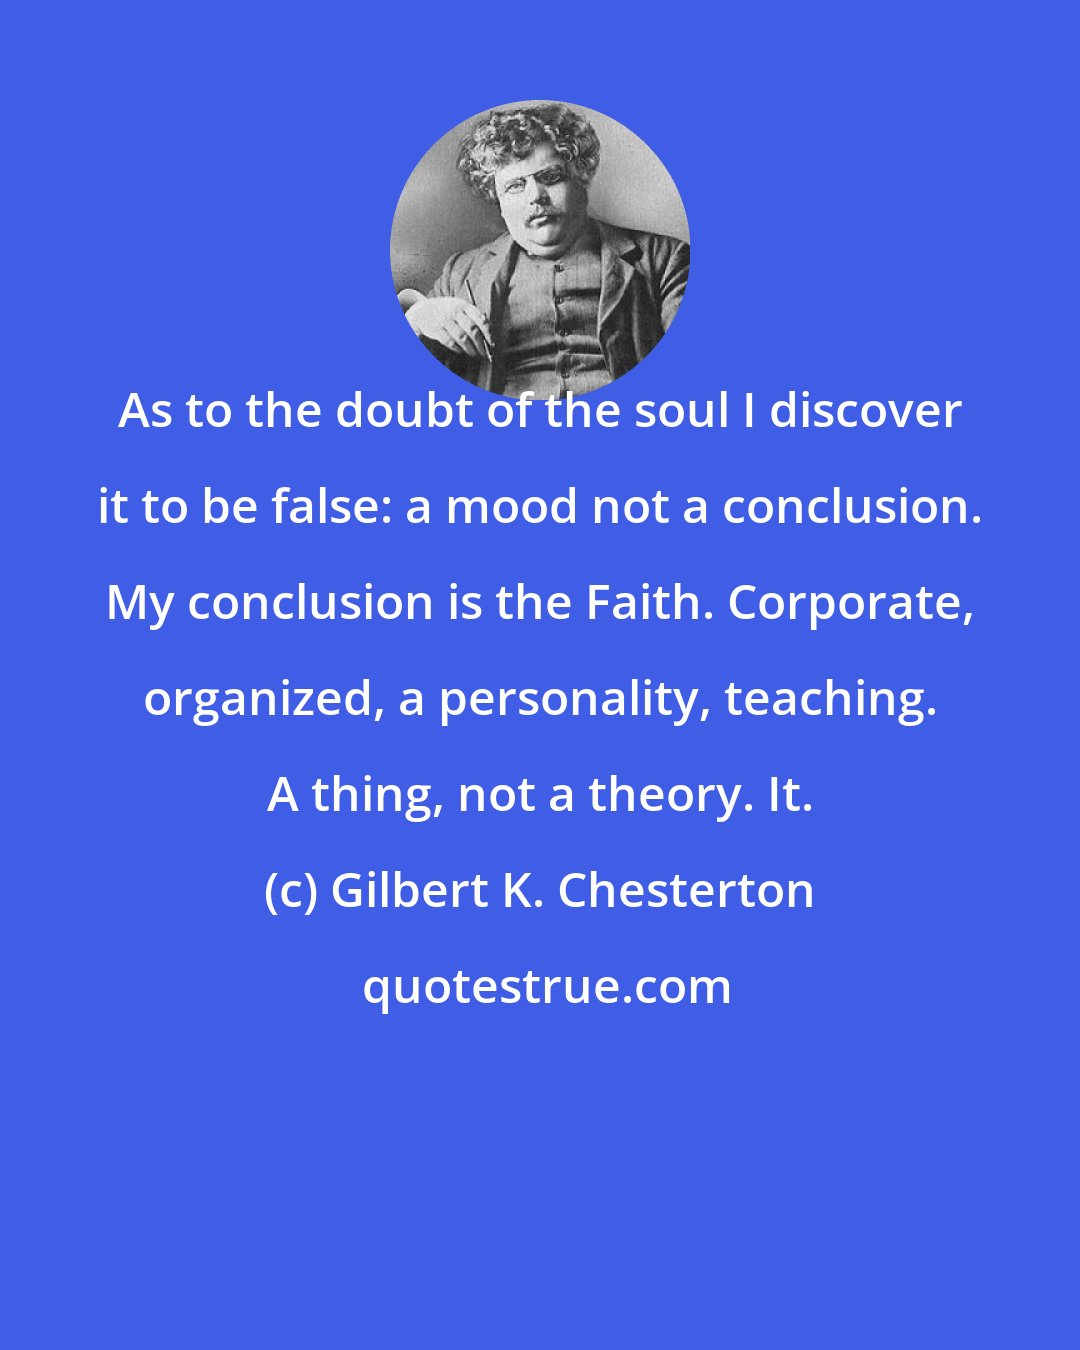 Gilbert K. Chesterton: As to the doubt of the soul I discover it to be false: a mood not a conclusion. My conclusion is the Faith. Corporate, organized, a personality, teaching. A thing, not a theory. It.